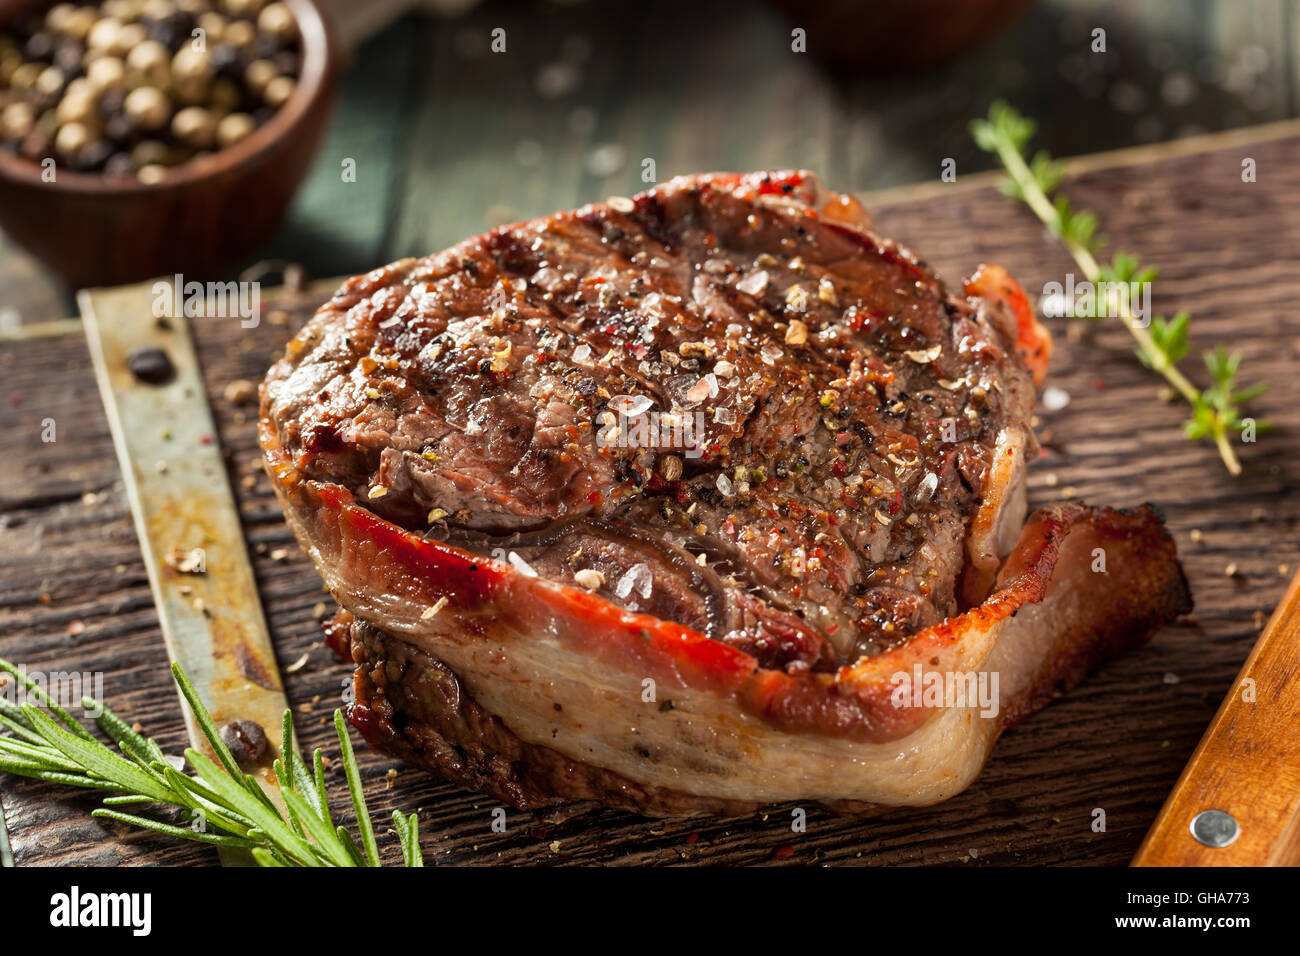 Organic Grass Fed Bacon Wrapped Sirloin Steak with Herbs Stock Photo